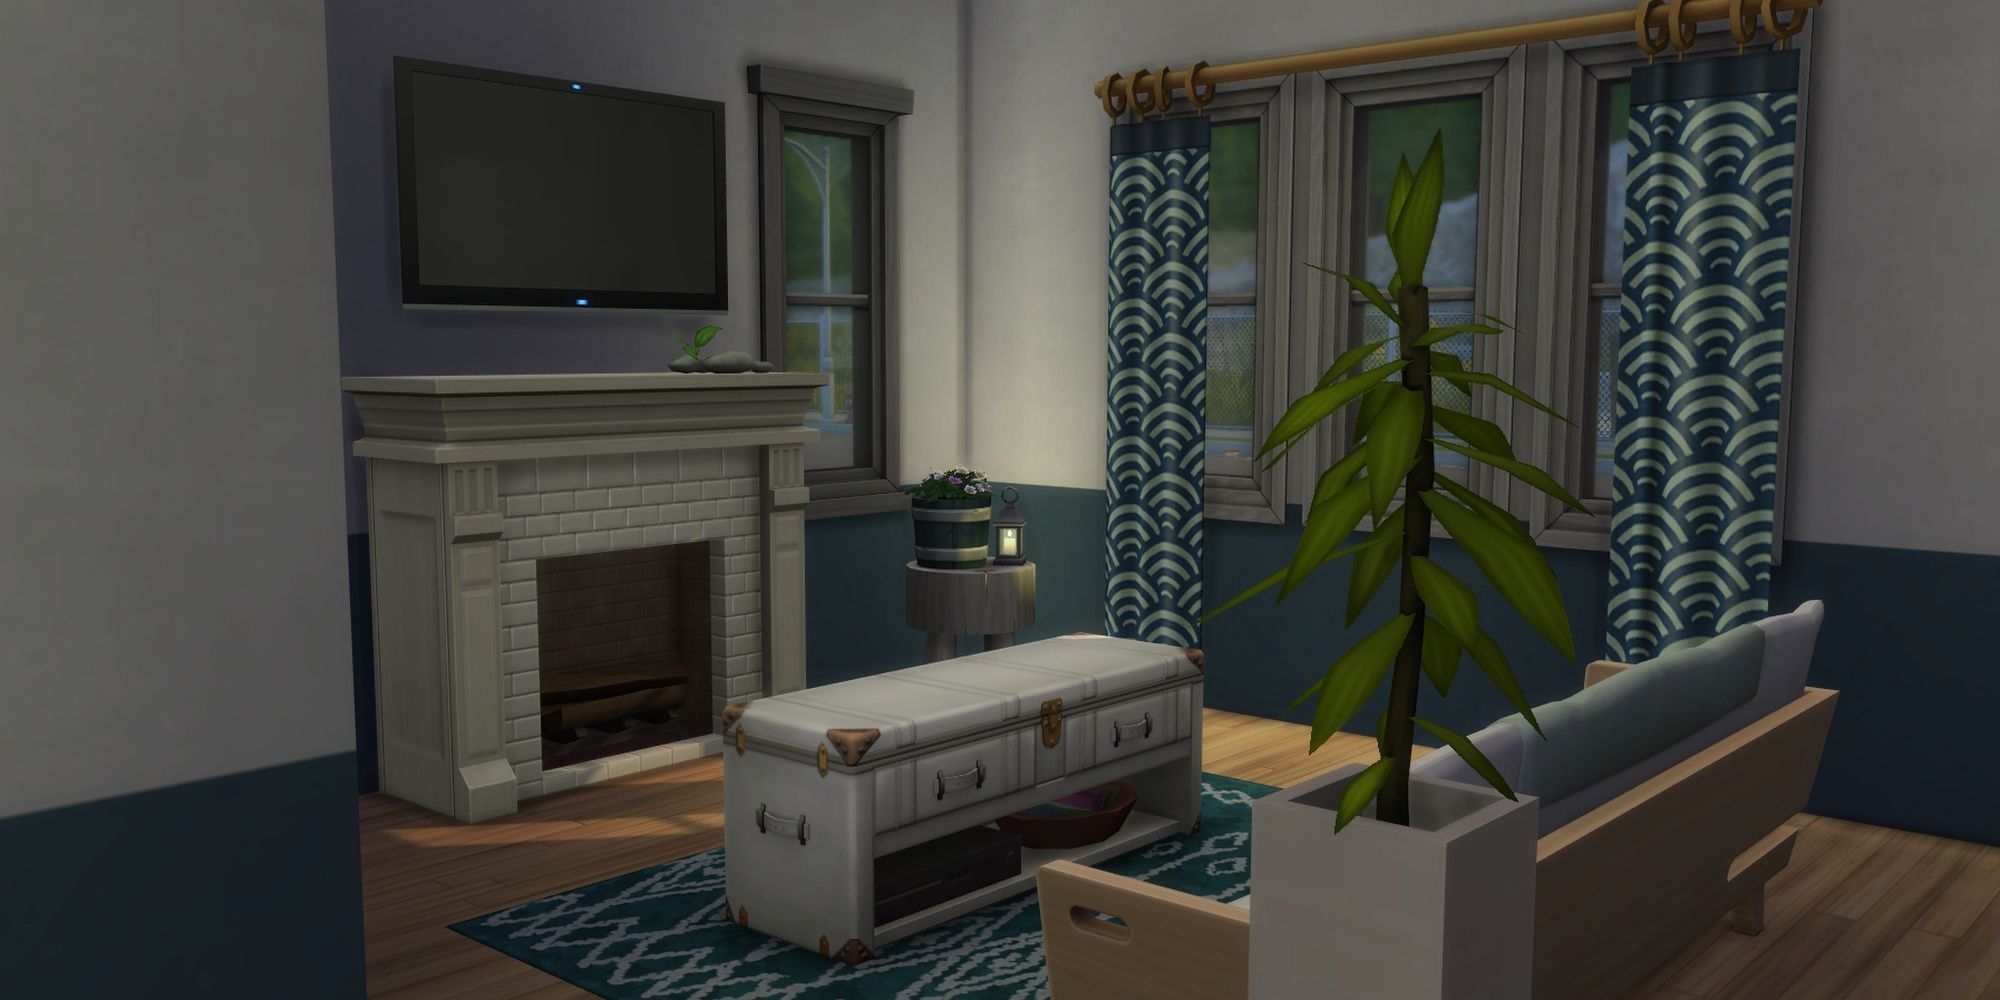 A living room in The Sims 4 styled in teal, white, and light wood with a patterned rug.